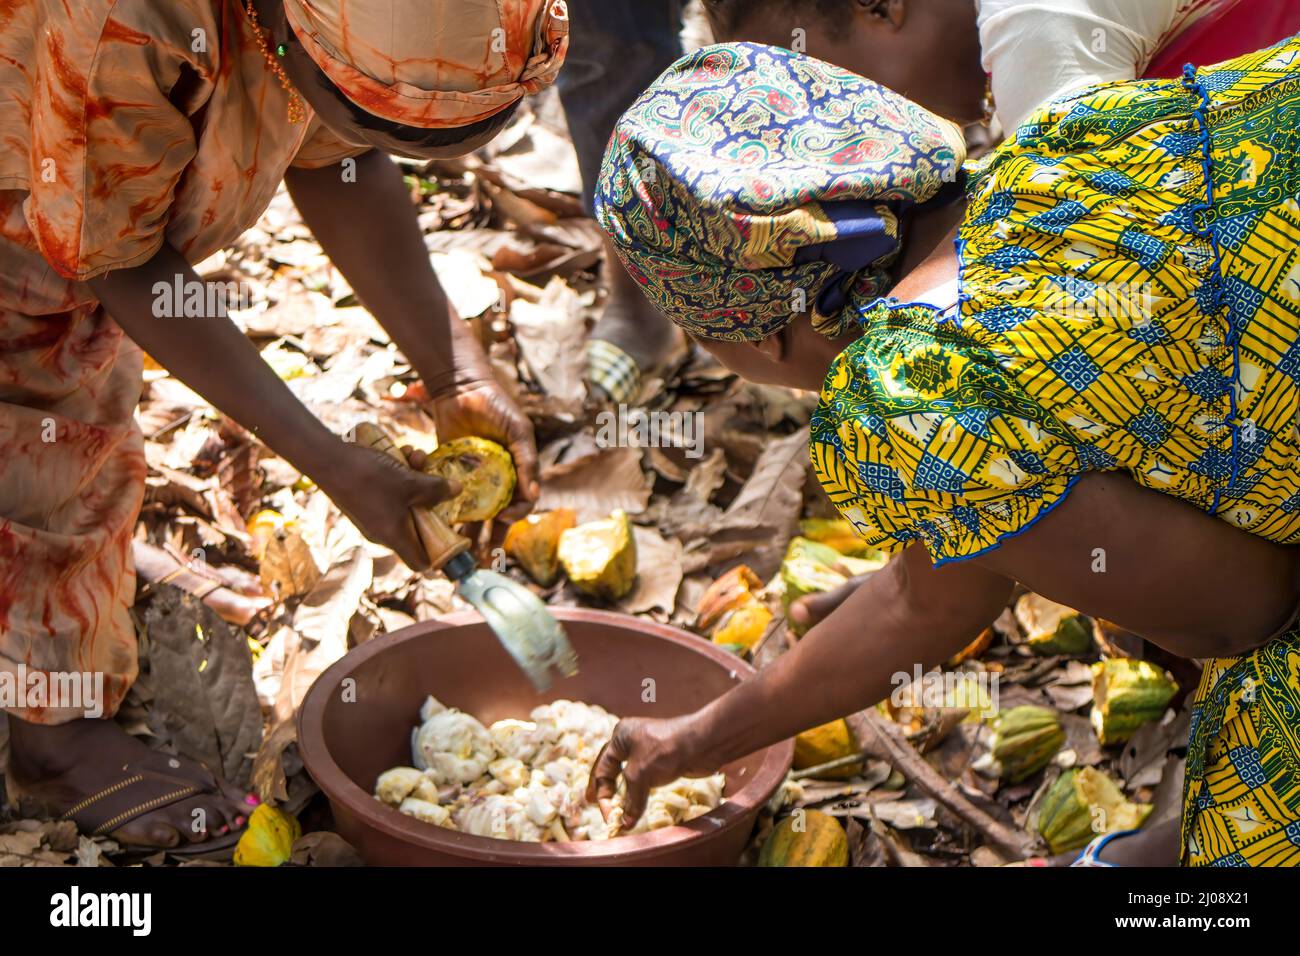 women farmers open cocoa pods to extract the beans, covered in white mucilage. Côte d'Ivoire Stock Photo